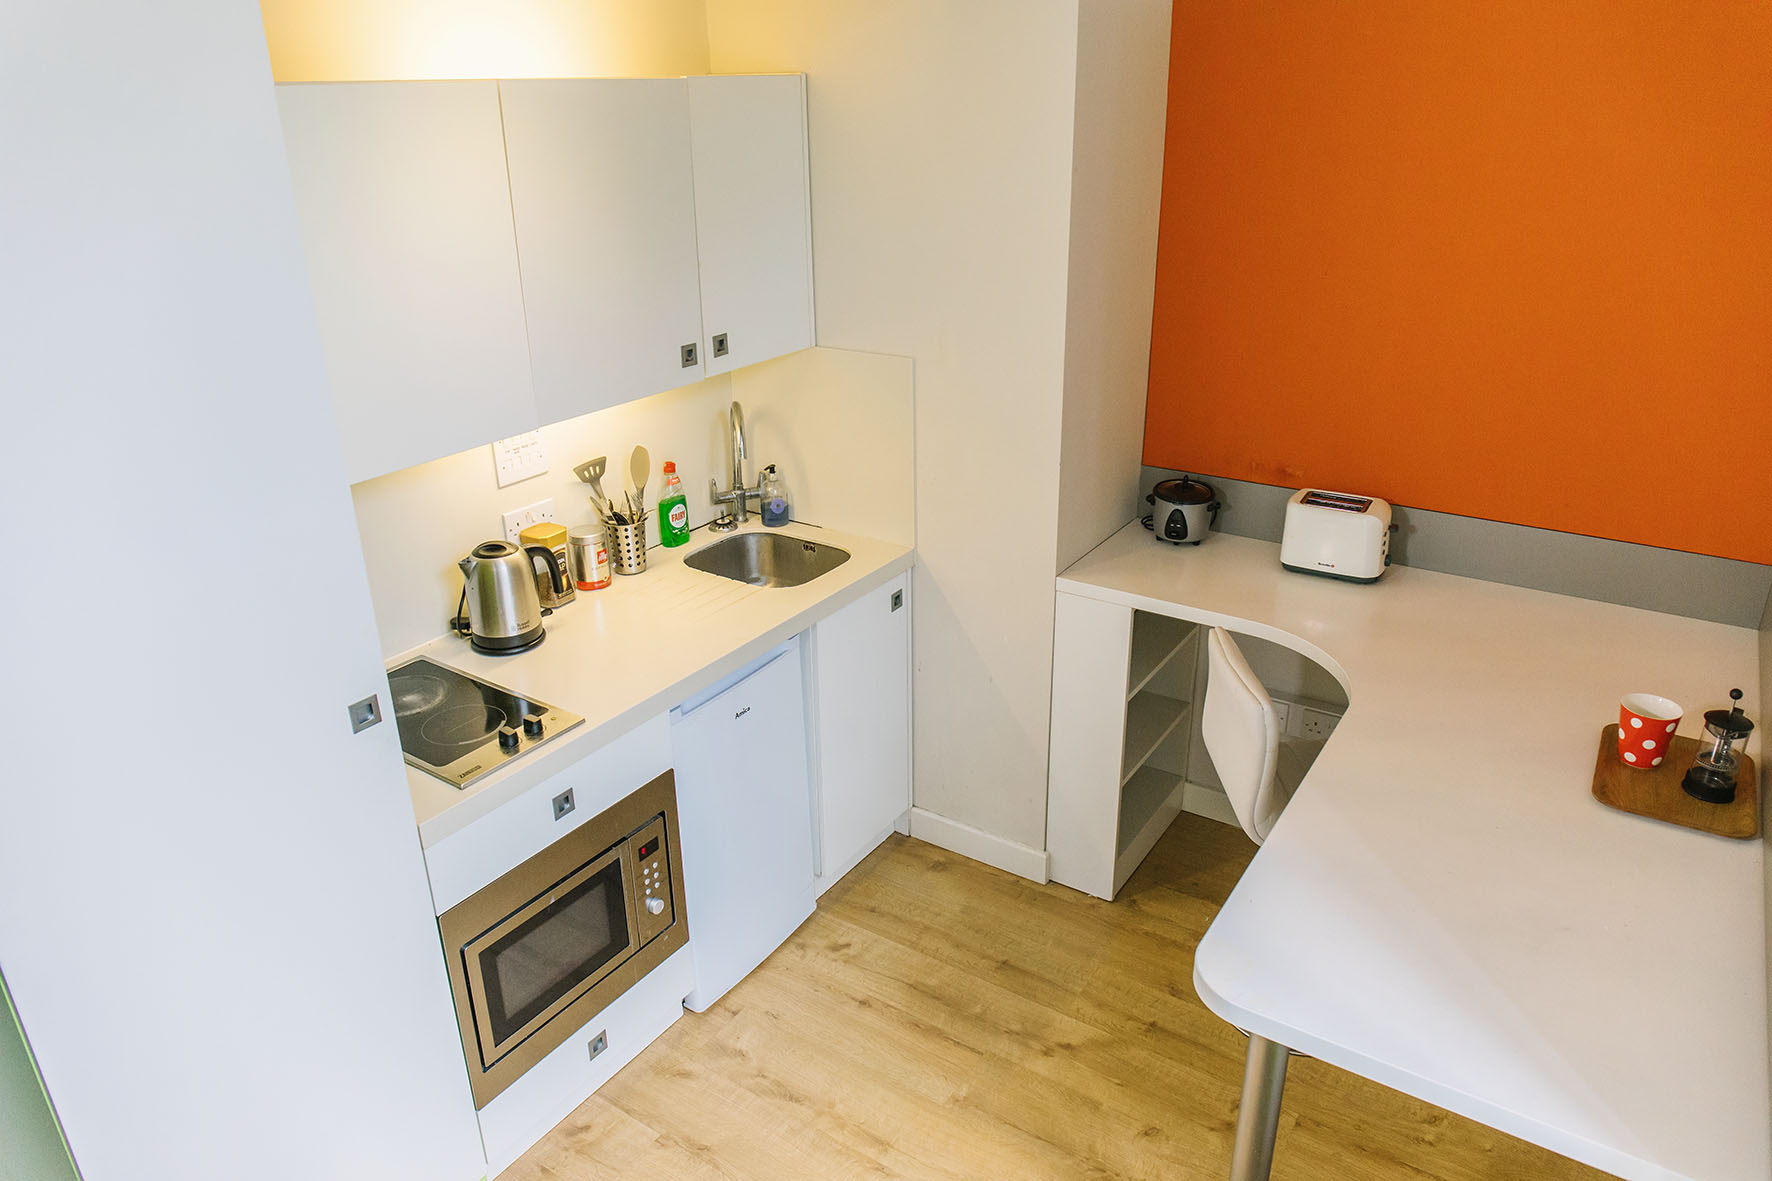 Kitchen in a Premium Range 3 Studio room at Cathedral Park in Bristol, Unite Students accommodation